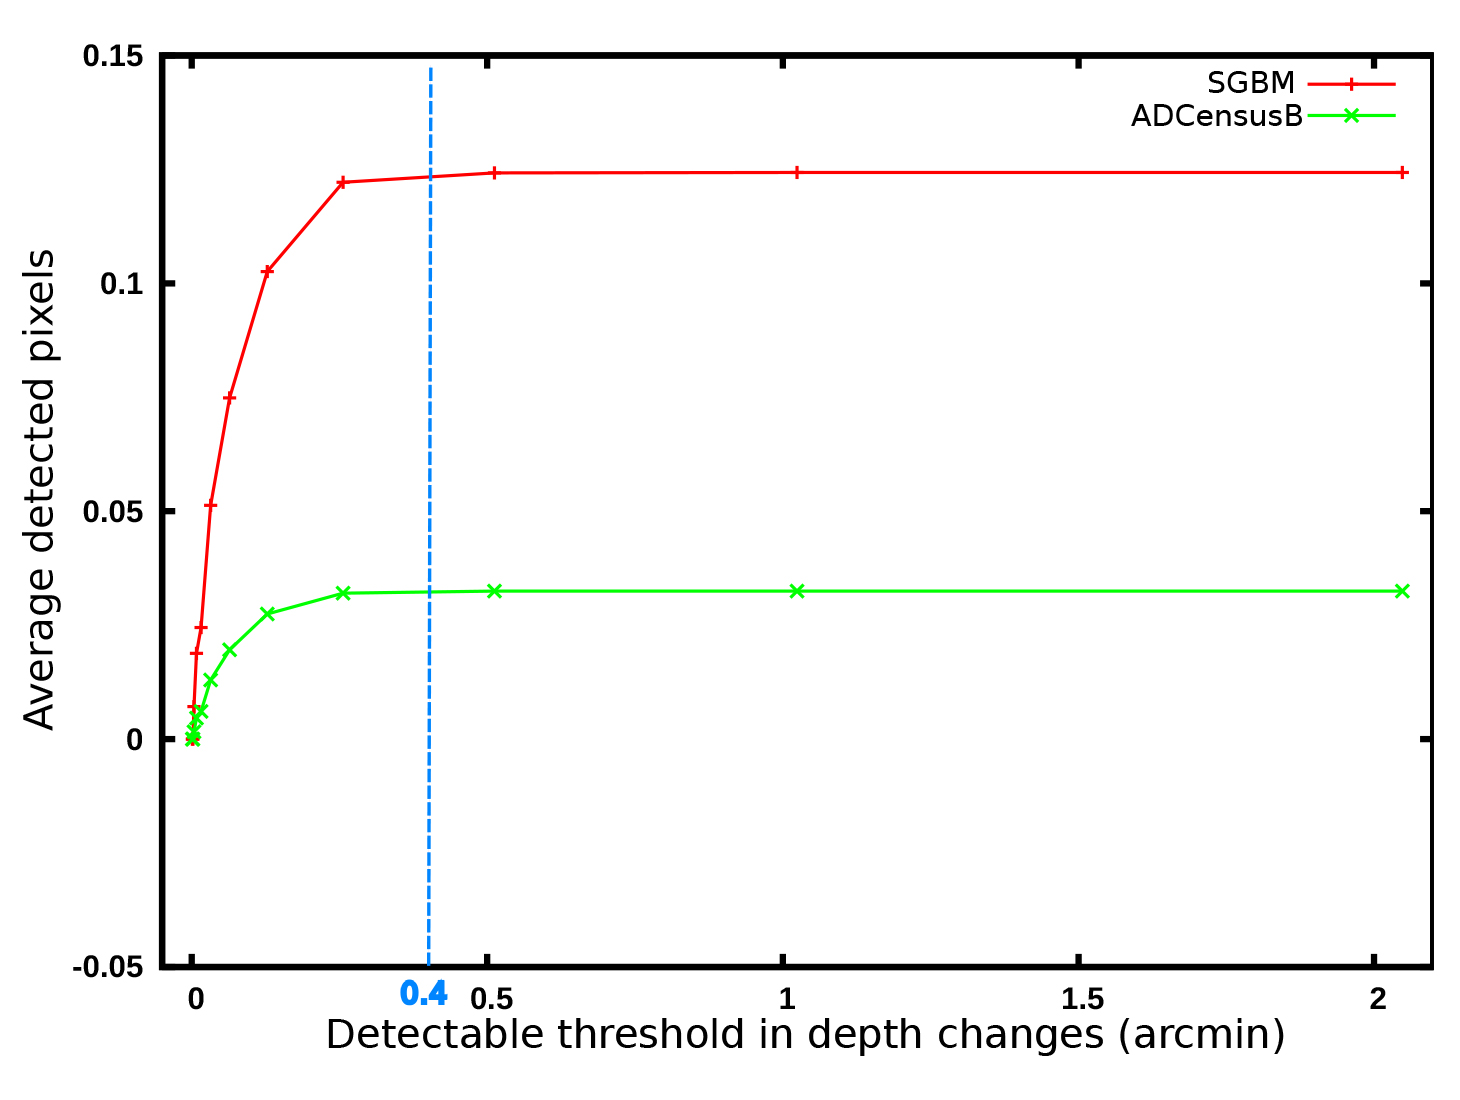 Average of detected pixels by SGBM and ADCensusB for specific stereoacuity thresholds marked on each curve for a group of 12 images; the vertical blue line shows the approximate threshold after which the average of detected pixels converge